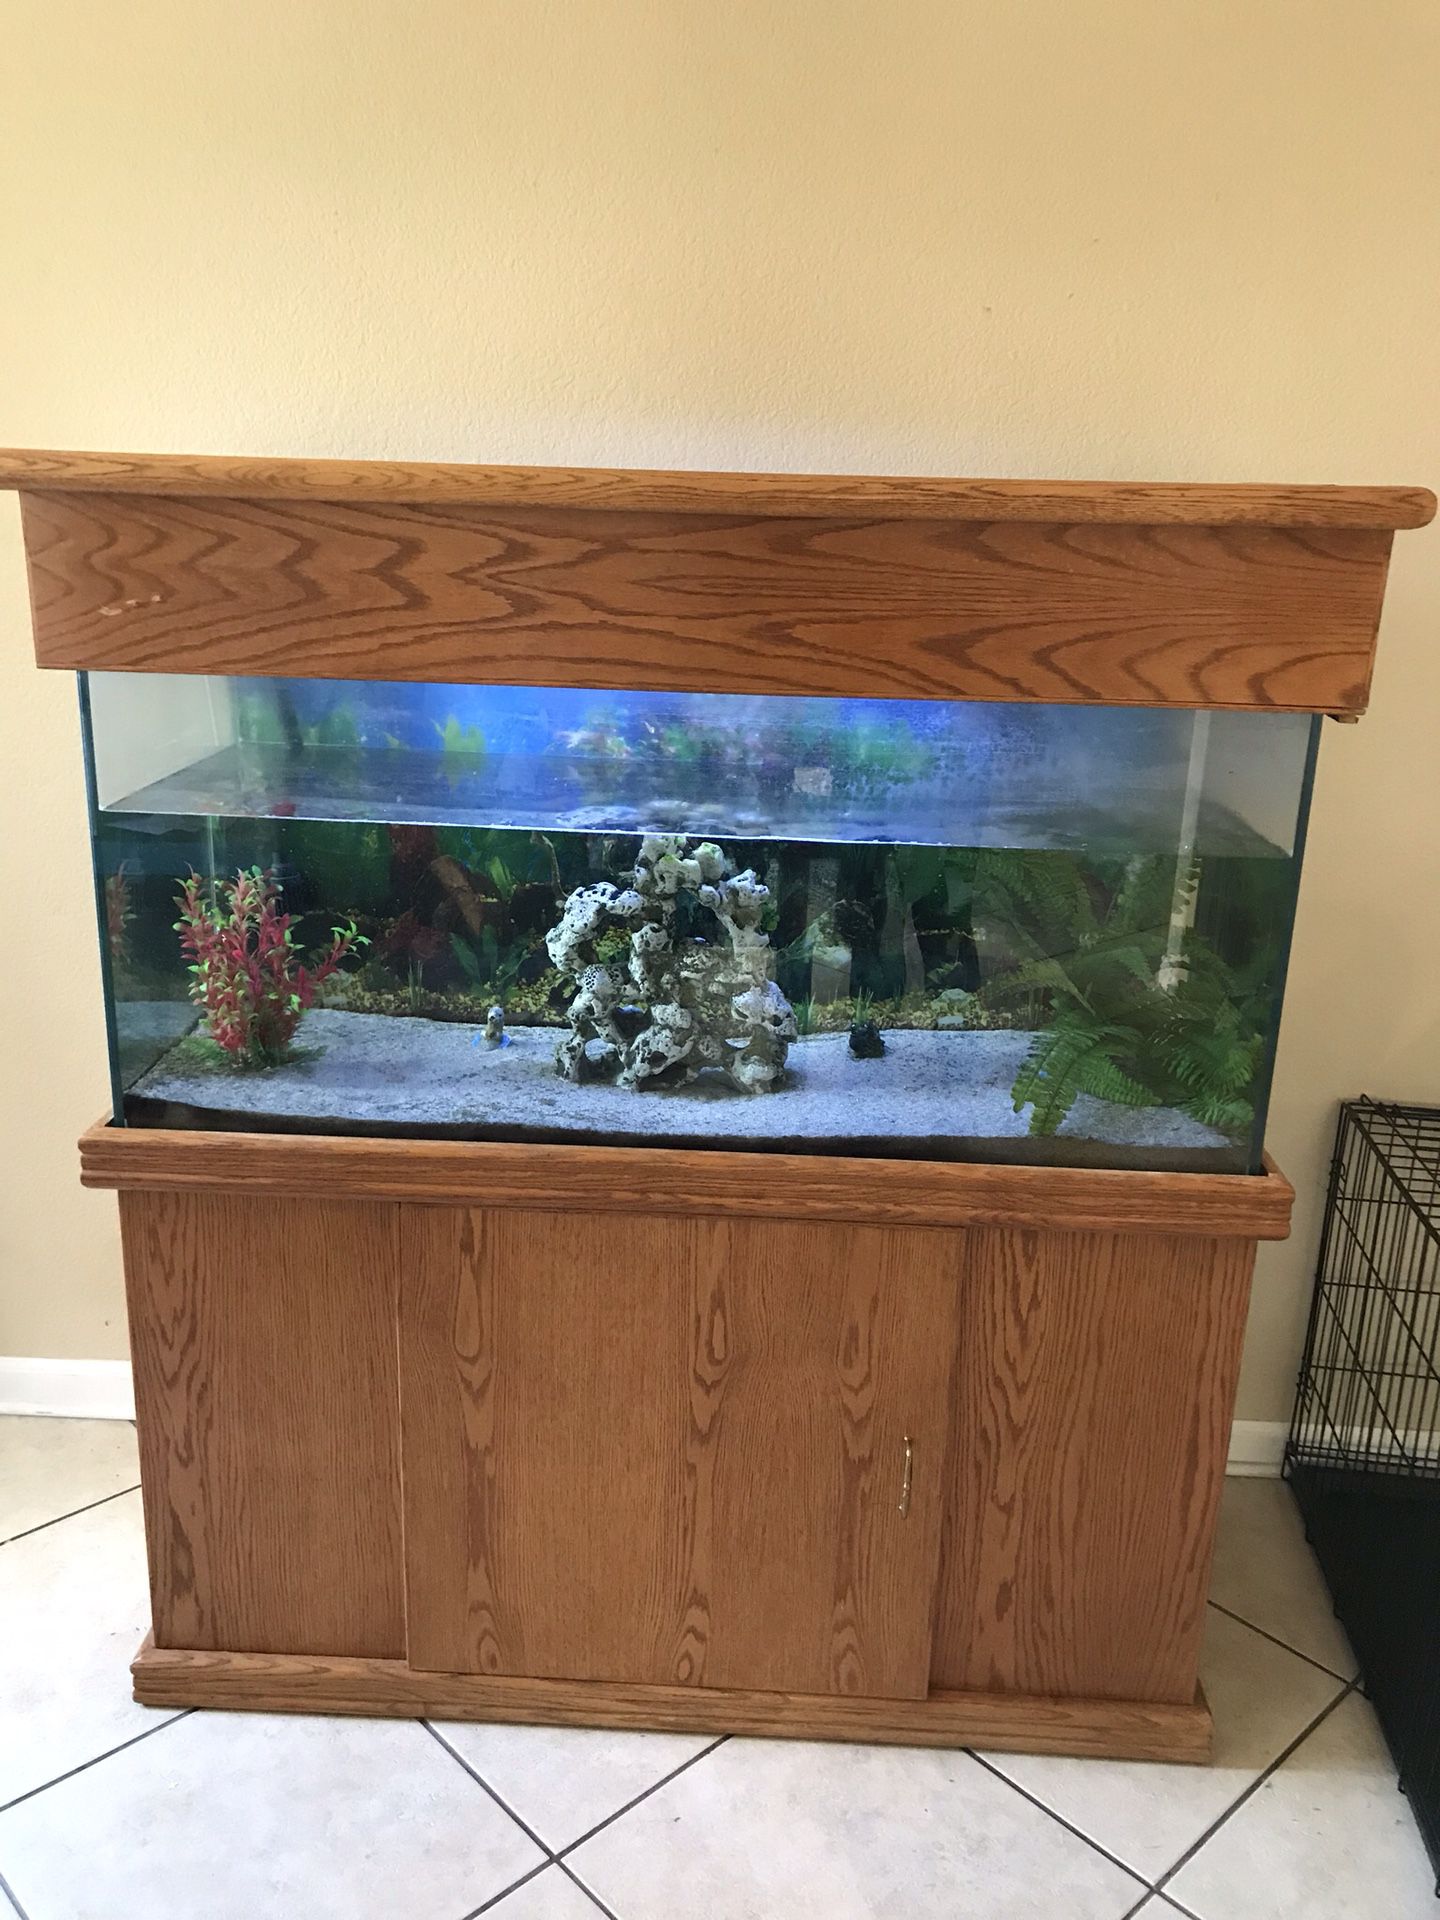 75 Gallon Fish Tank and Stand